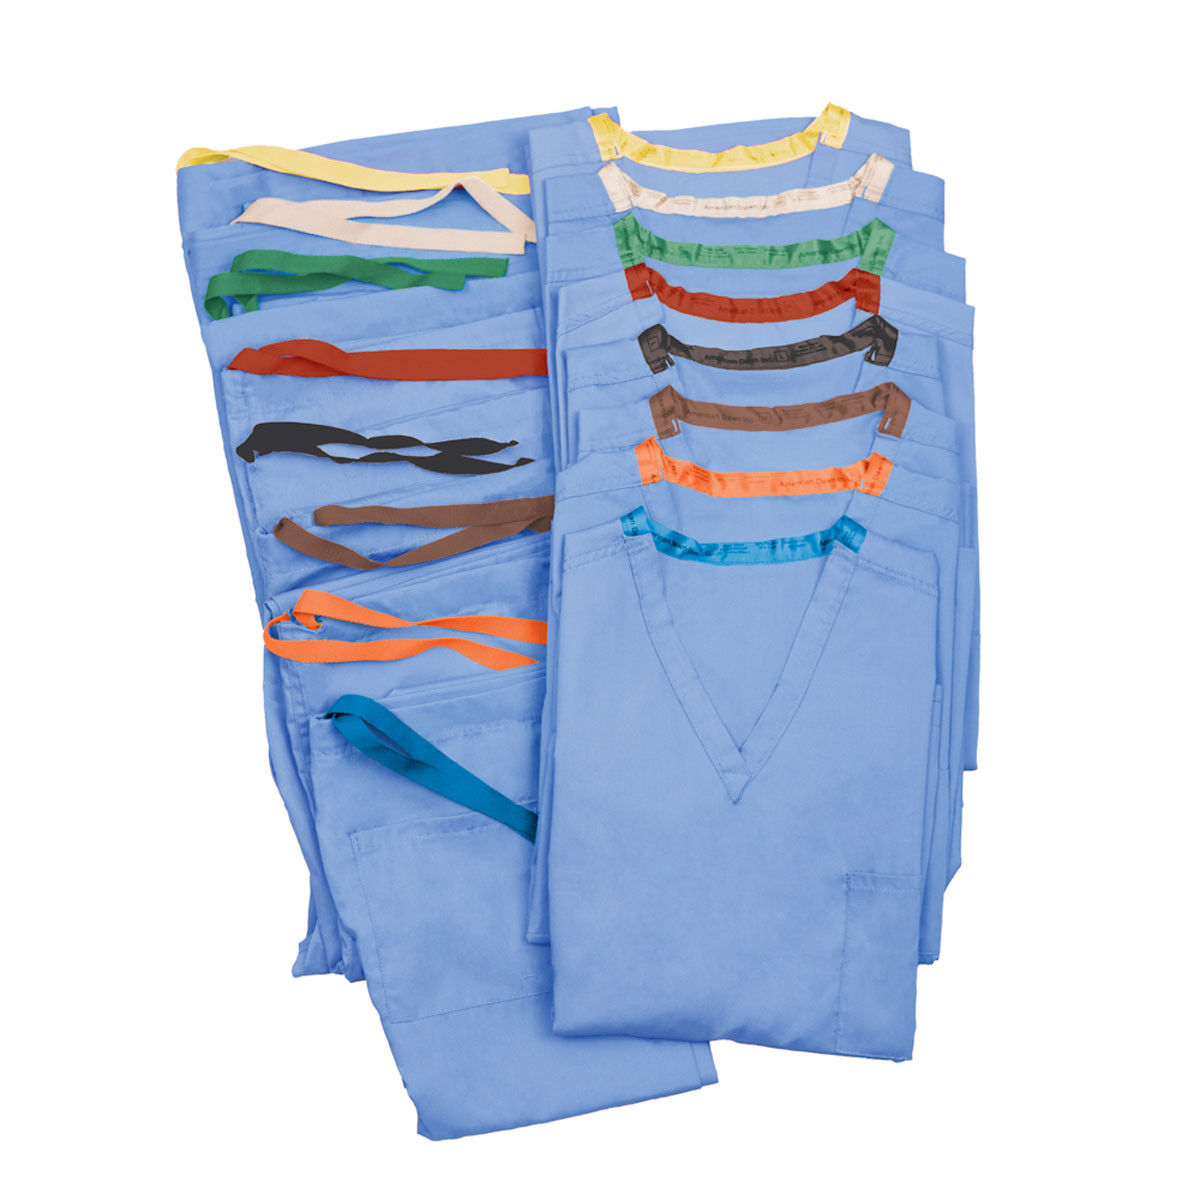 What's the right way to measure for these blue scrubs unisex pants?